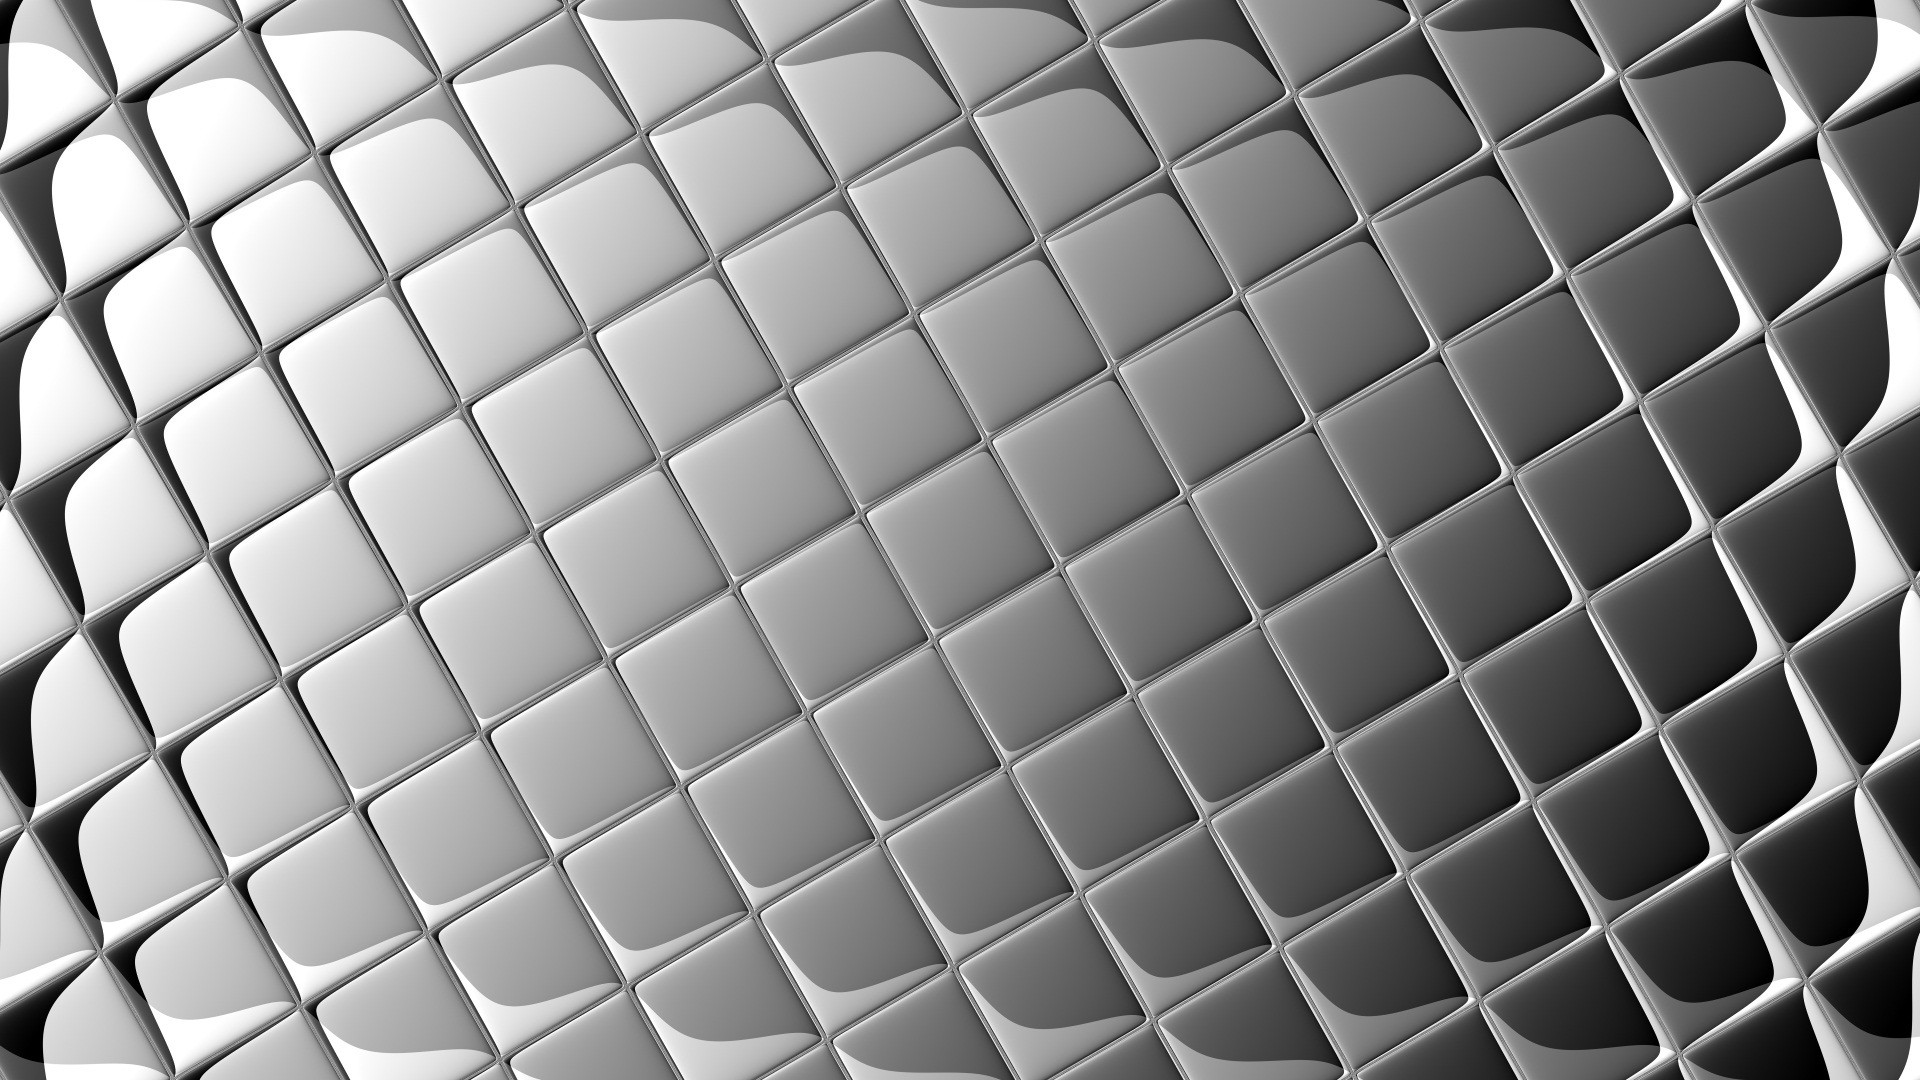 General 1920x1080 abstract texture monochrome silver